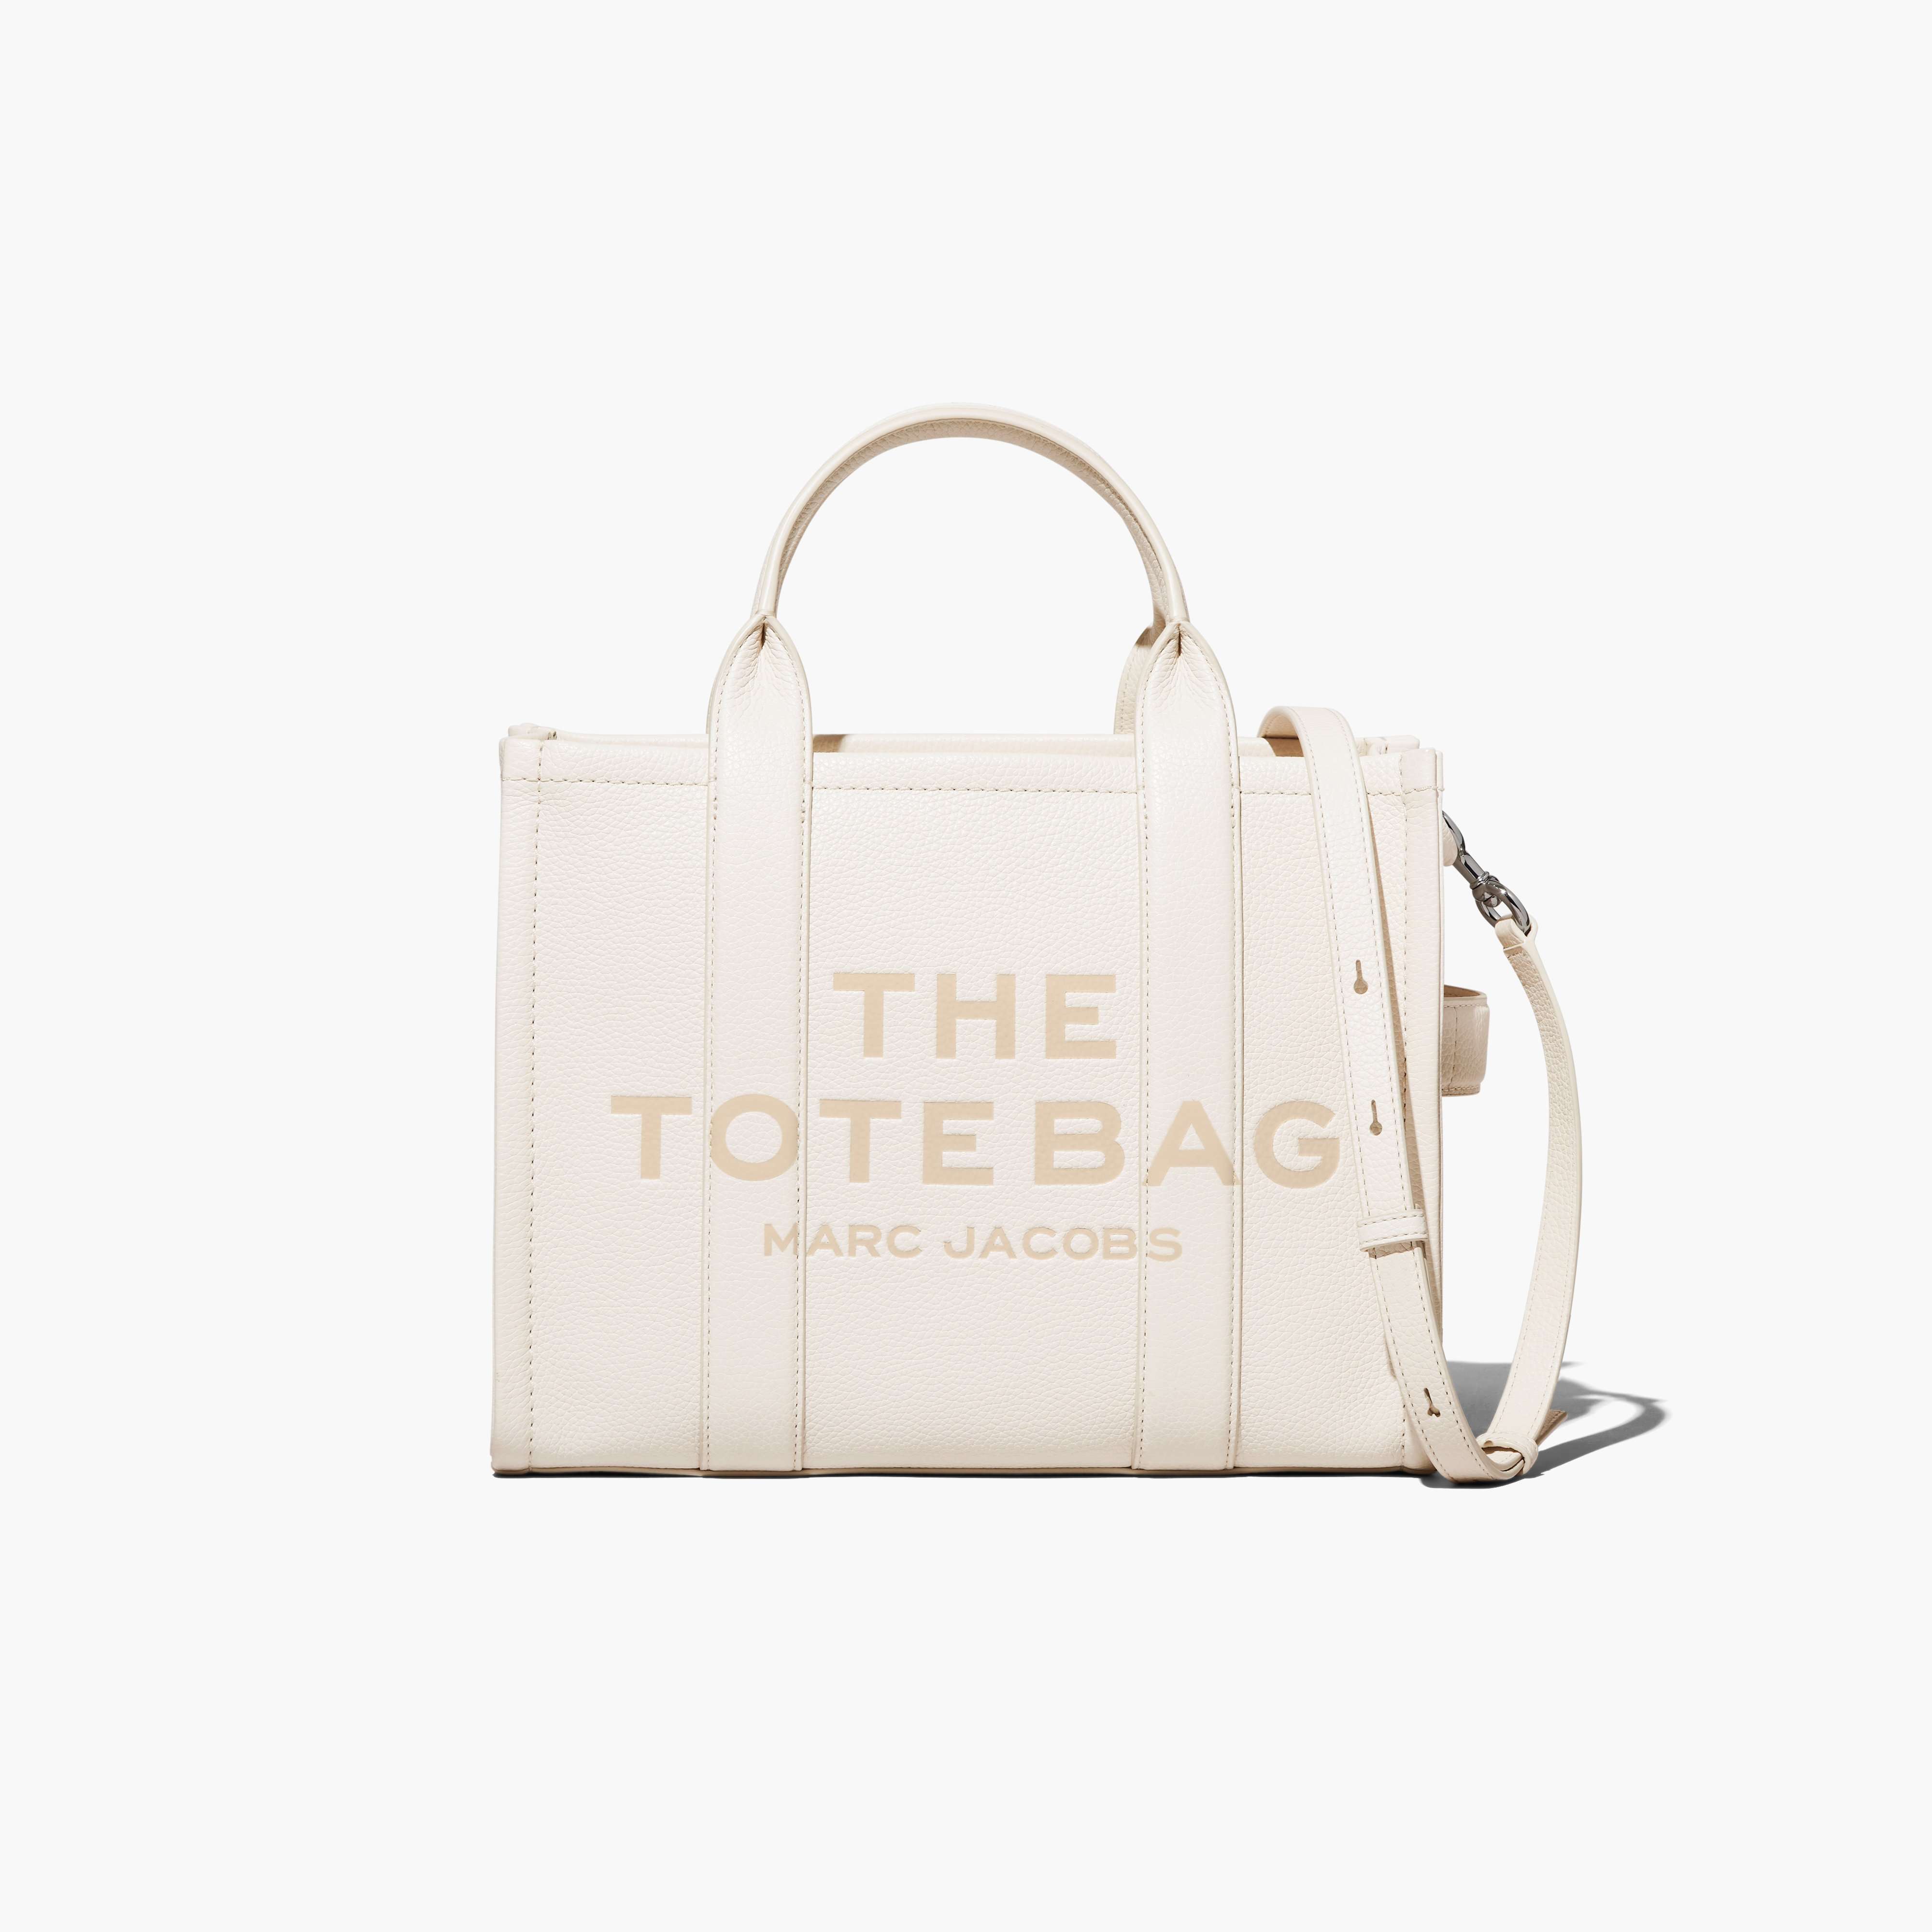 The Leather Medium Tote Bag in Cotton/Silver